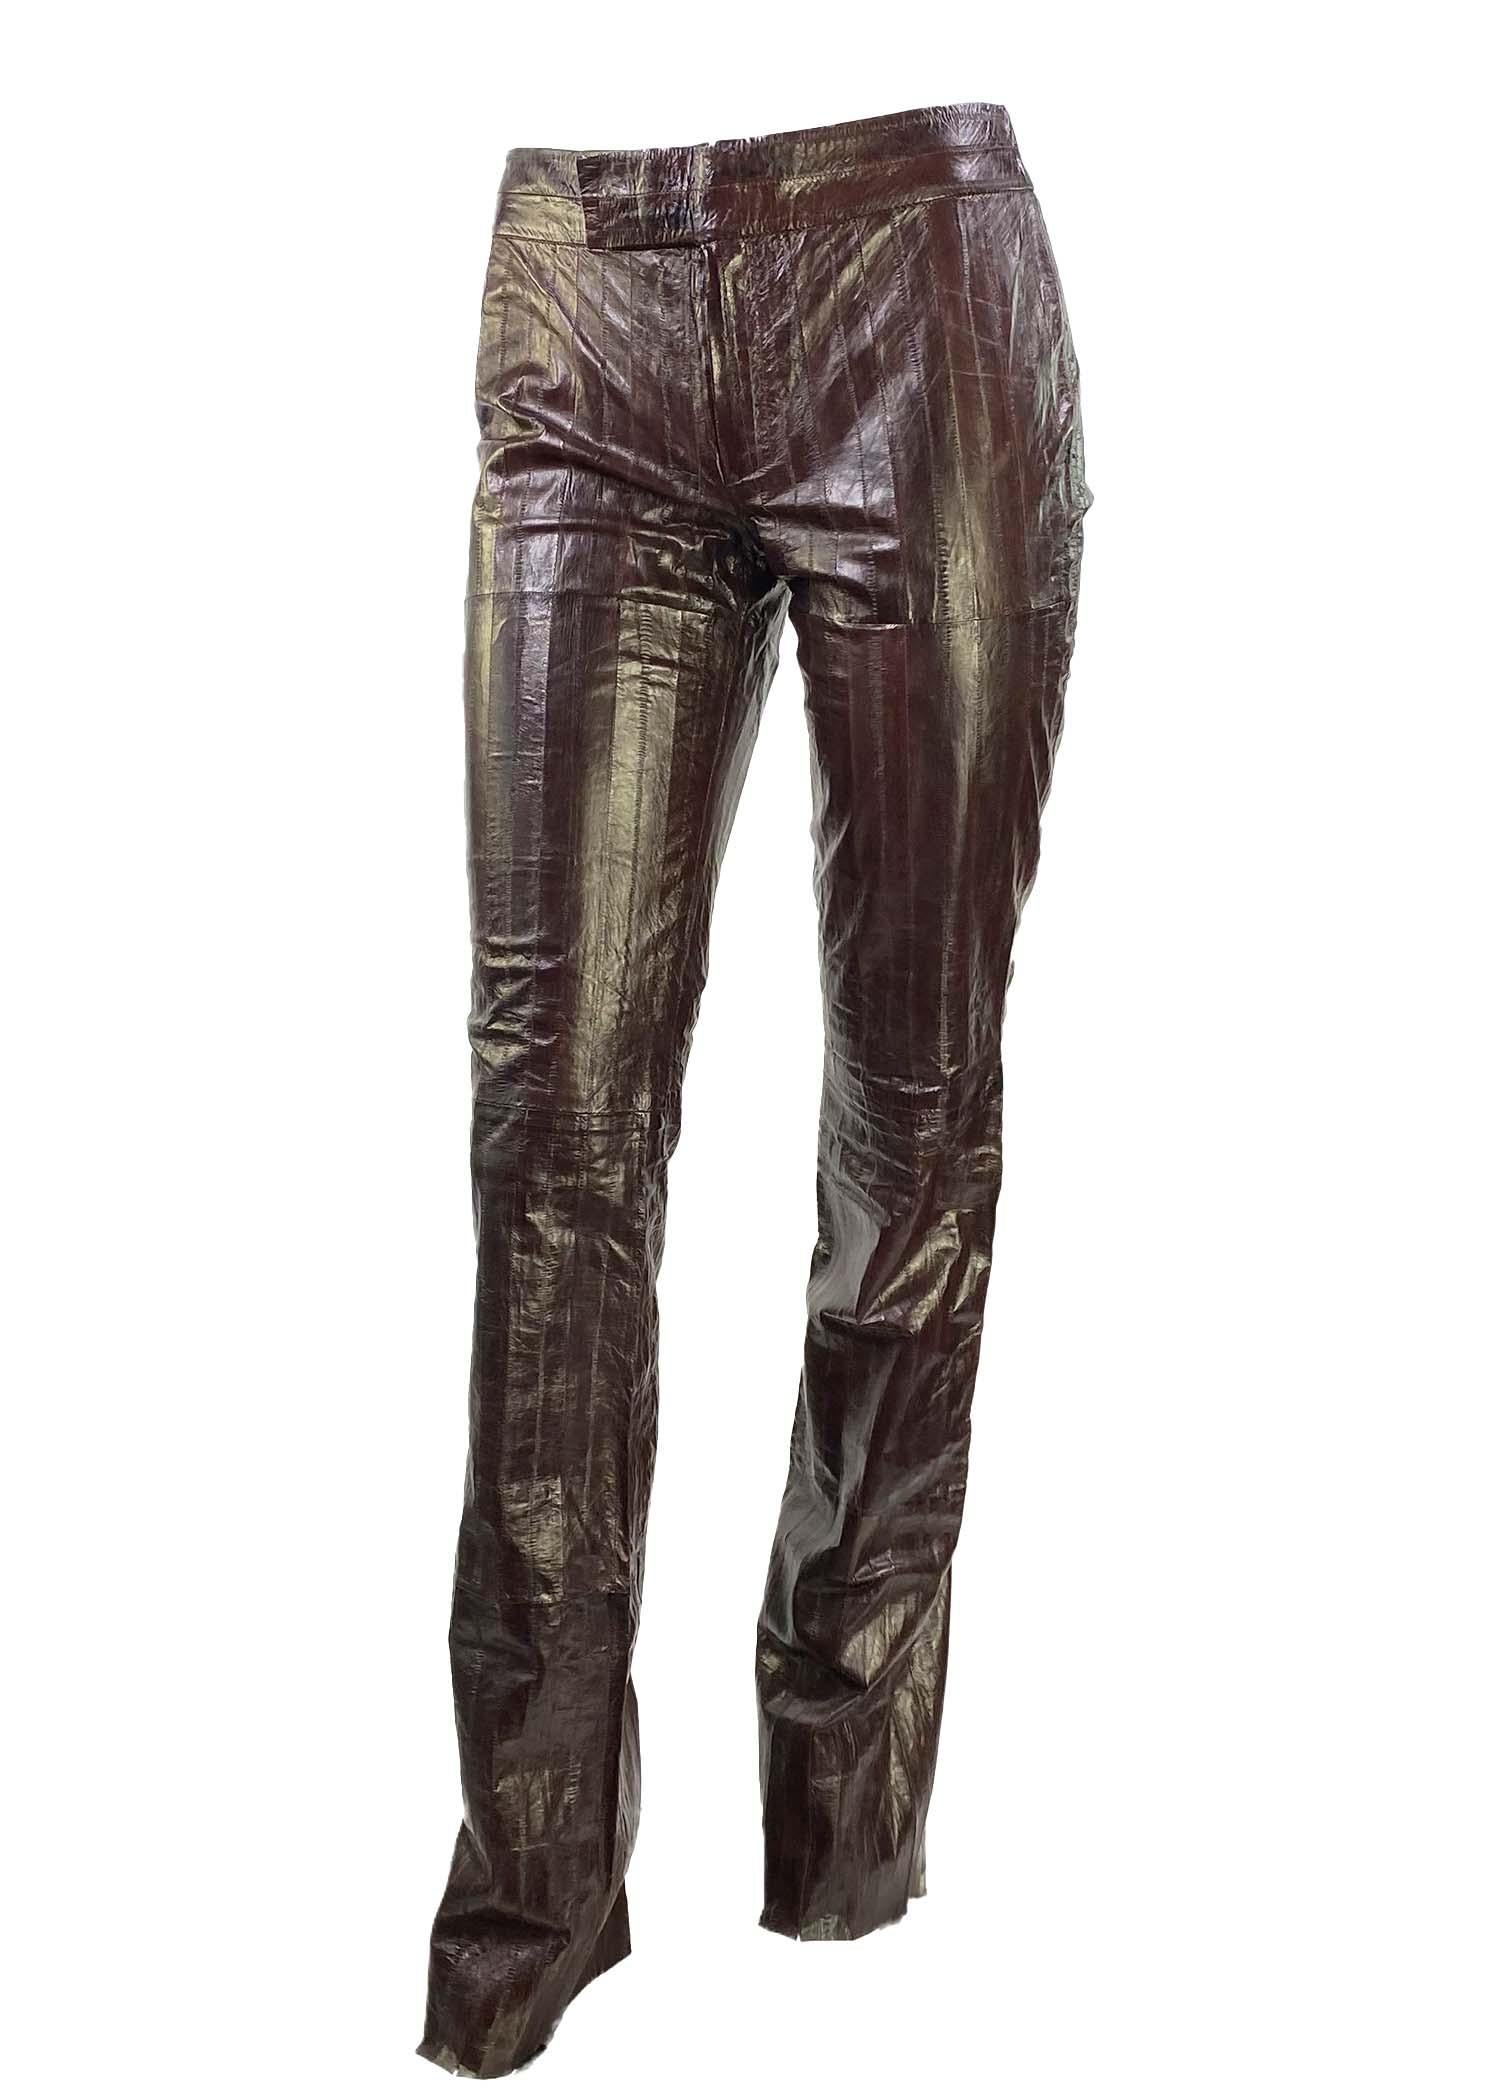 Presenting a fabulous pair of burgundy eel skin Gucci pants, designed by Tom Ford. Constructed entirely of eel hides, these semi-flared pants boast a rich deep red color with natural color variation from the eel skin. A rare find, these pants make a